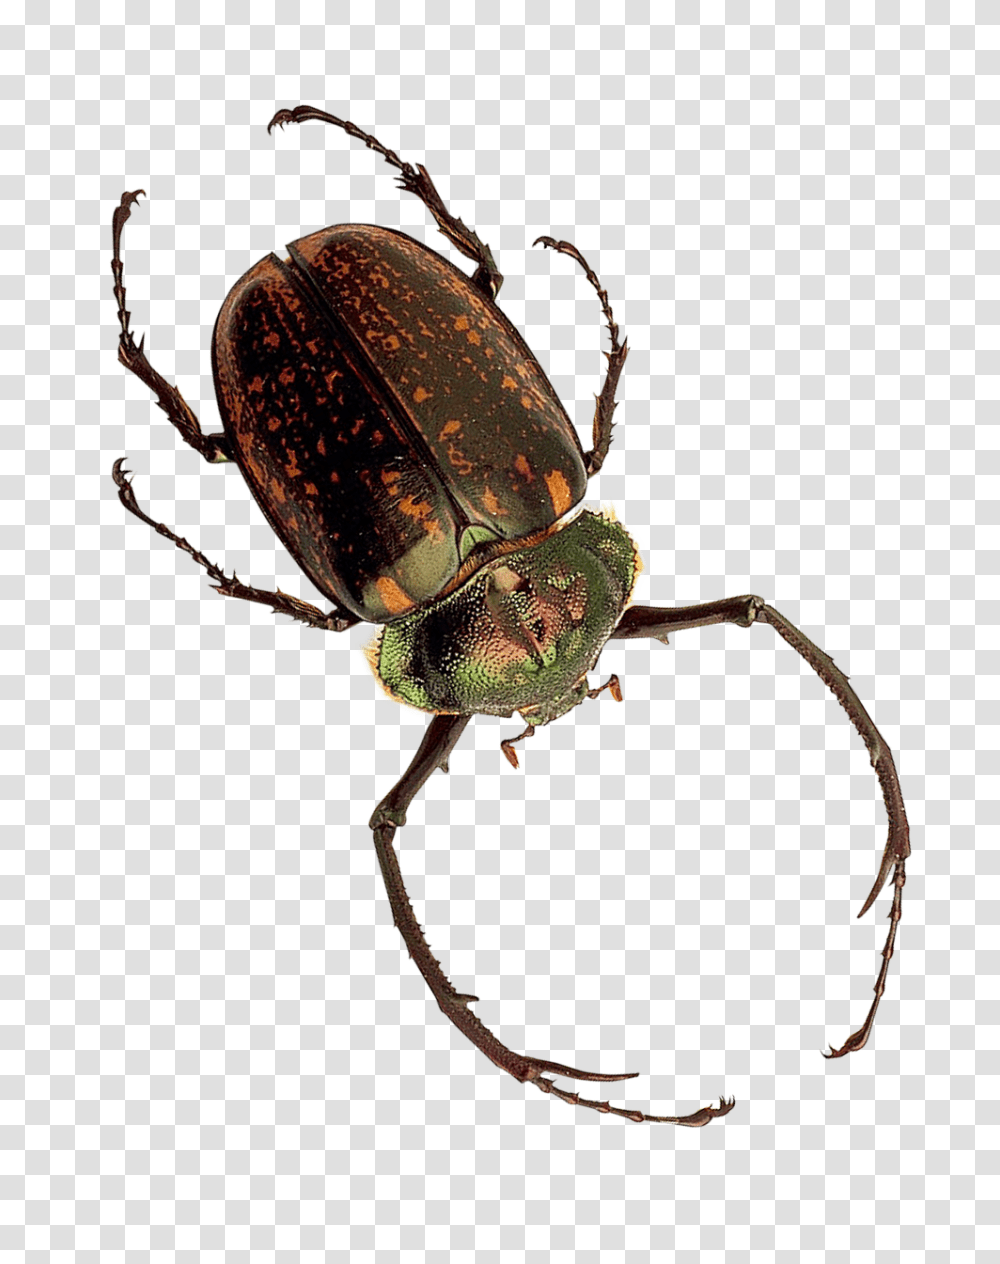 Insect Image, Invertebrate, Animal, Dung Beetle, Cockroach Transparent Png